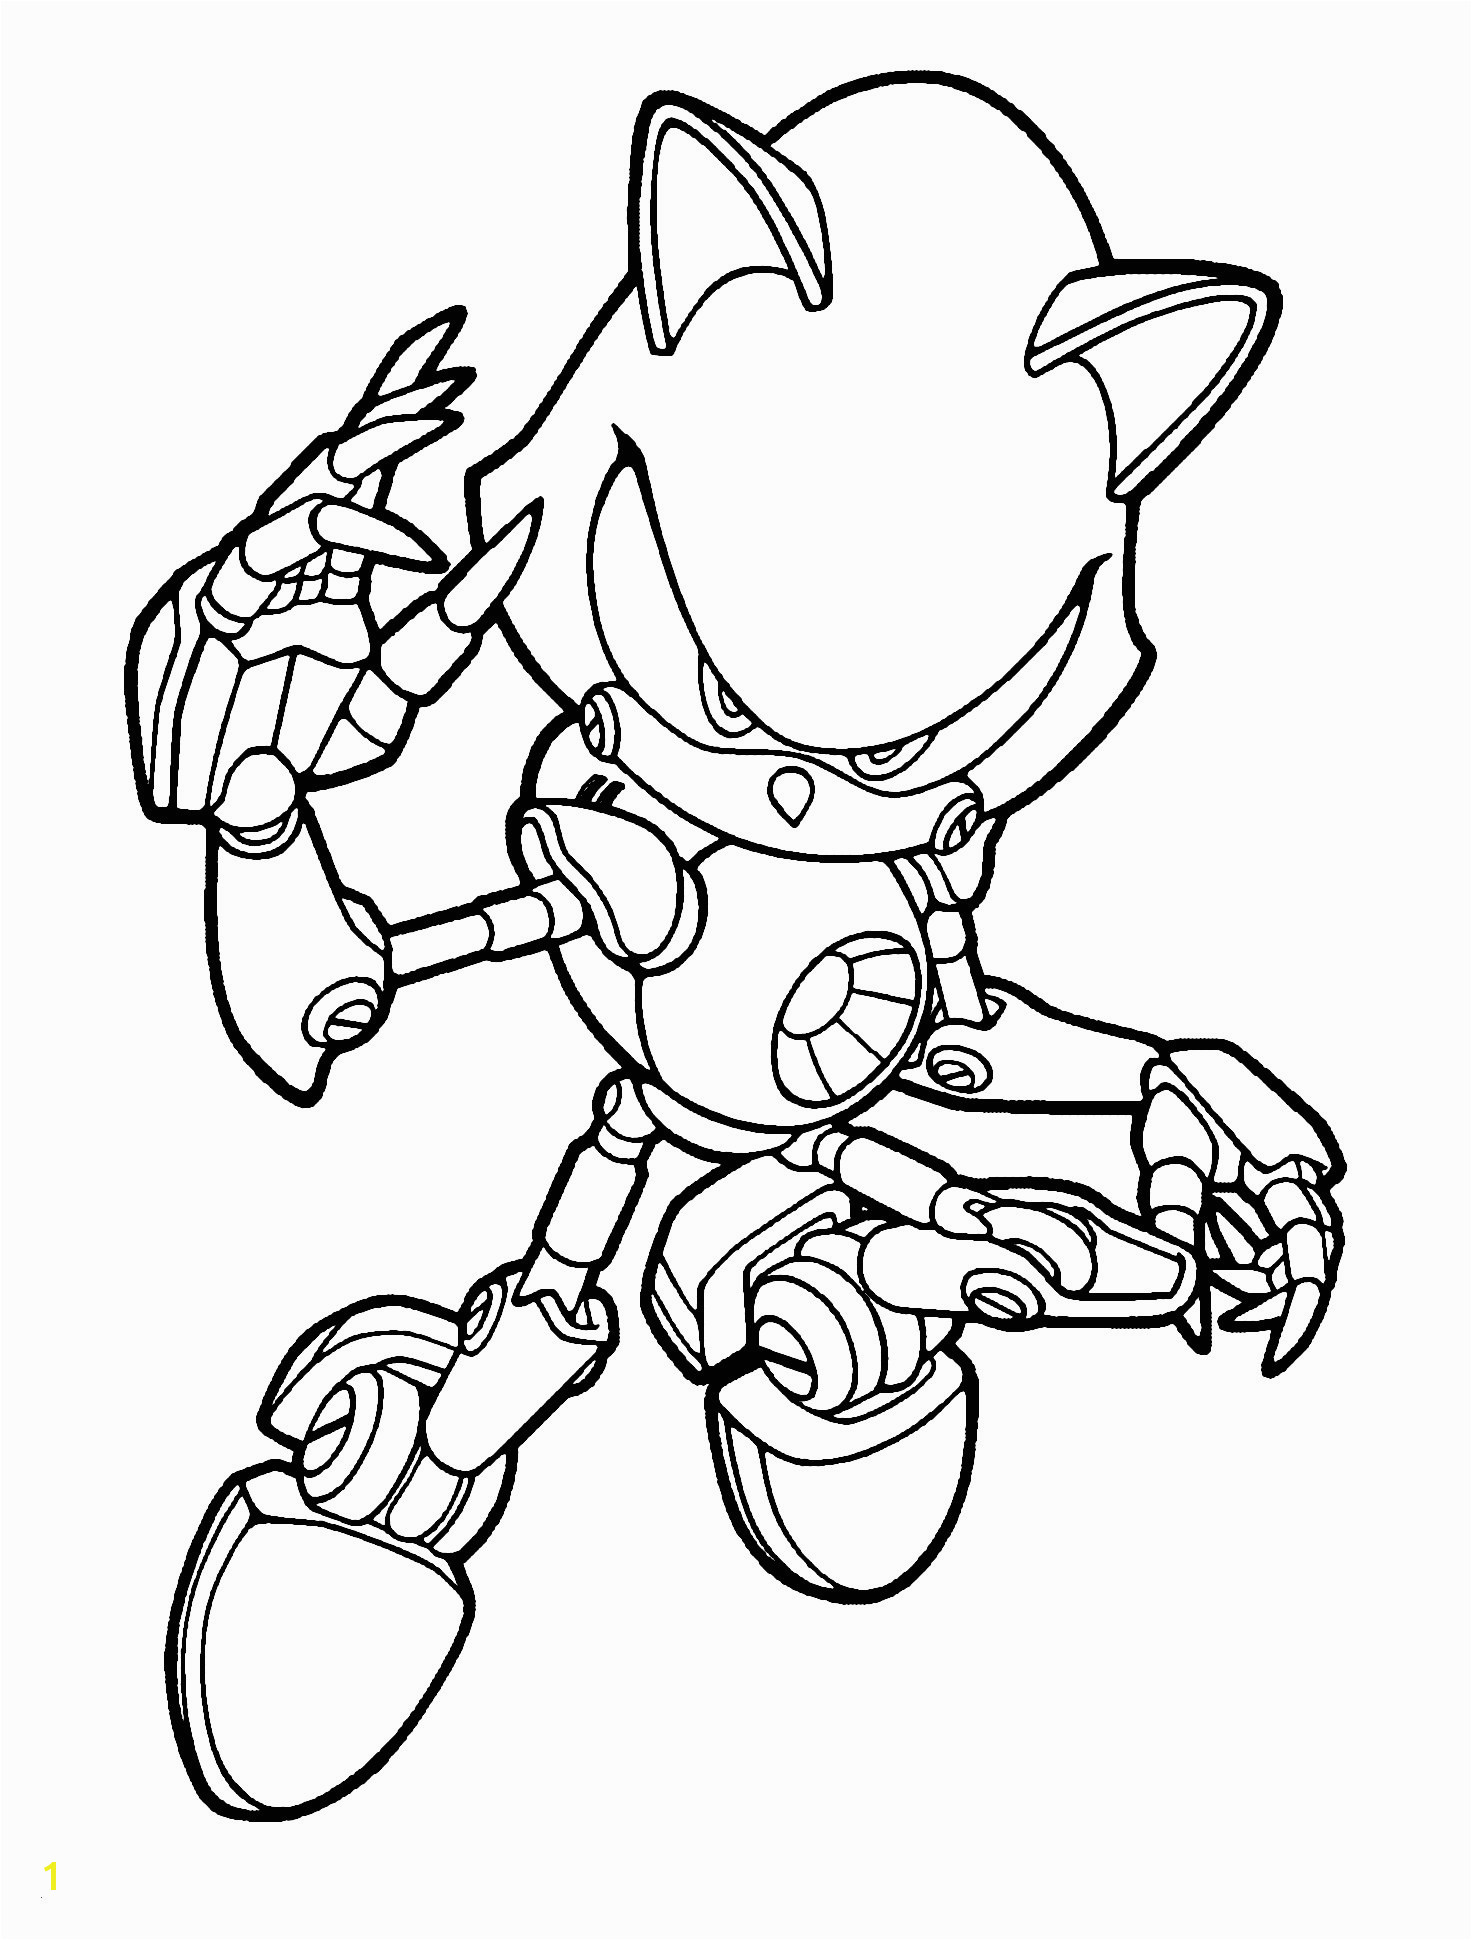 Sonic the Hedgehog Ausmalbilder Best sonic Coloring Pages New Awesome sonic the Hedgehog Outline Coloring